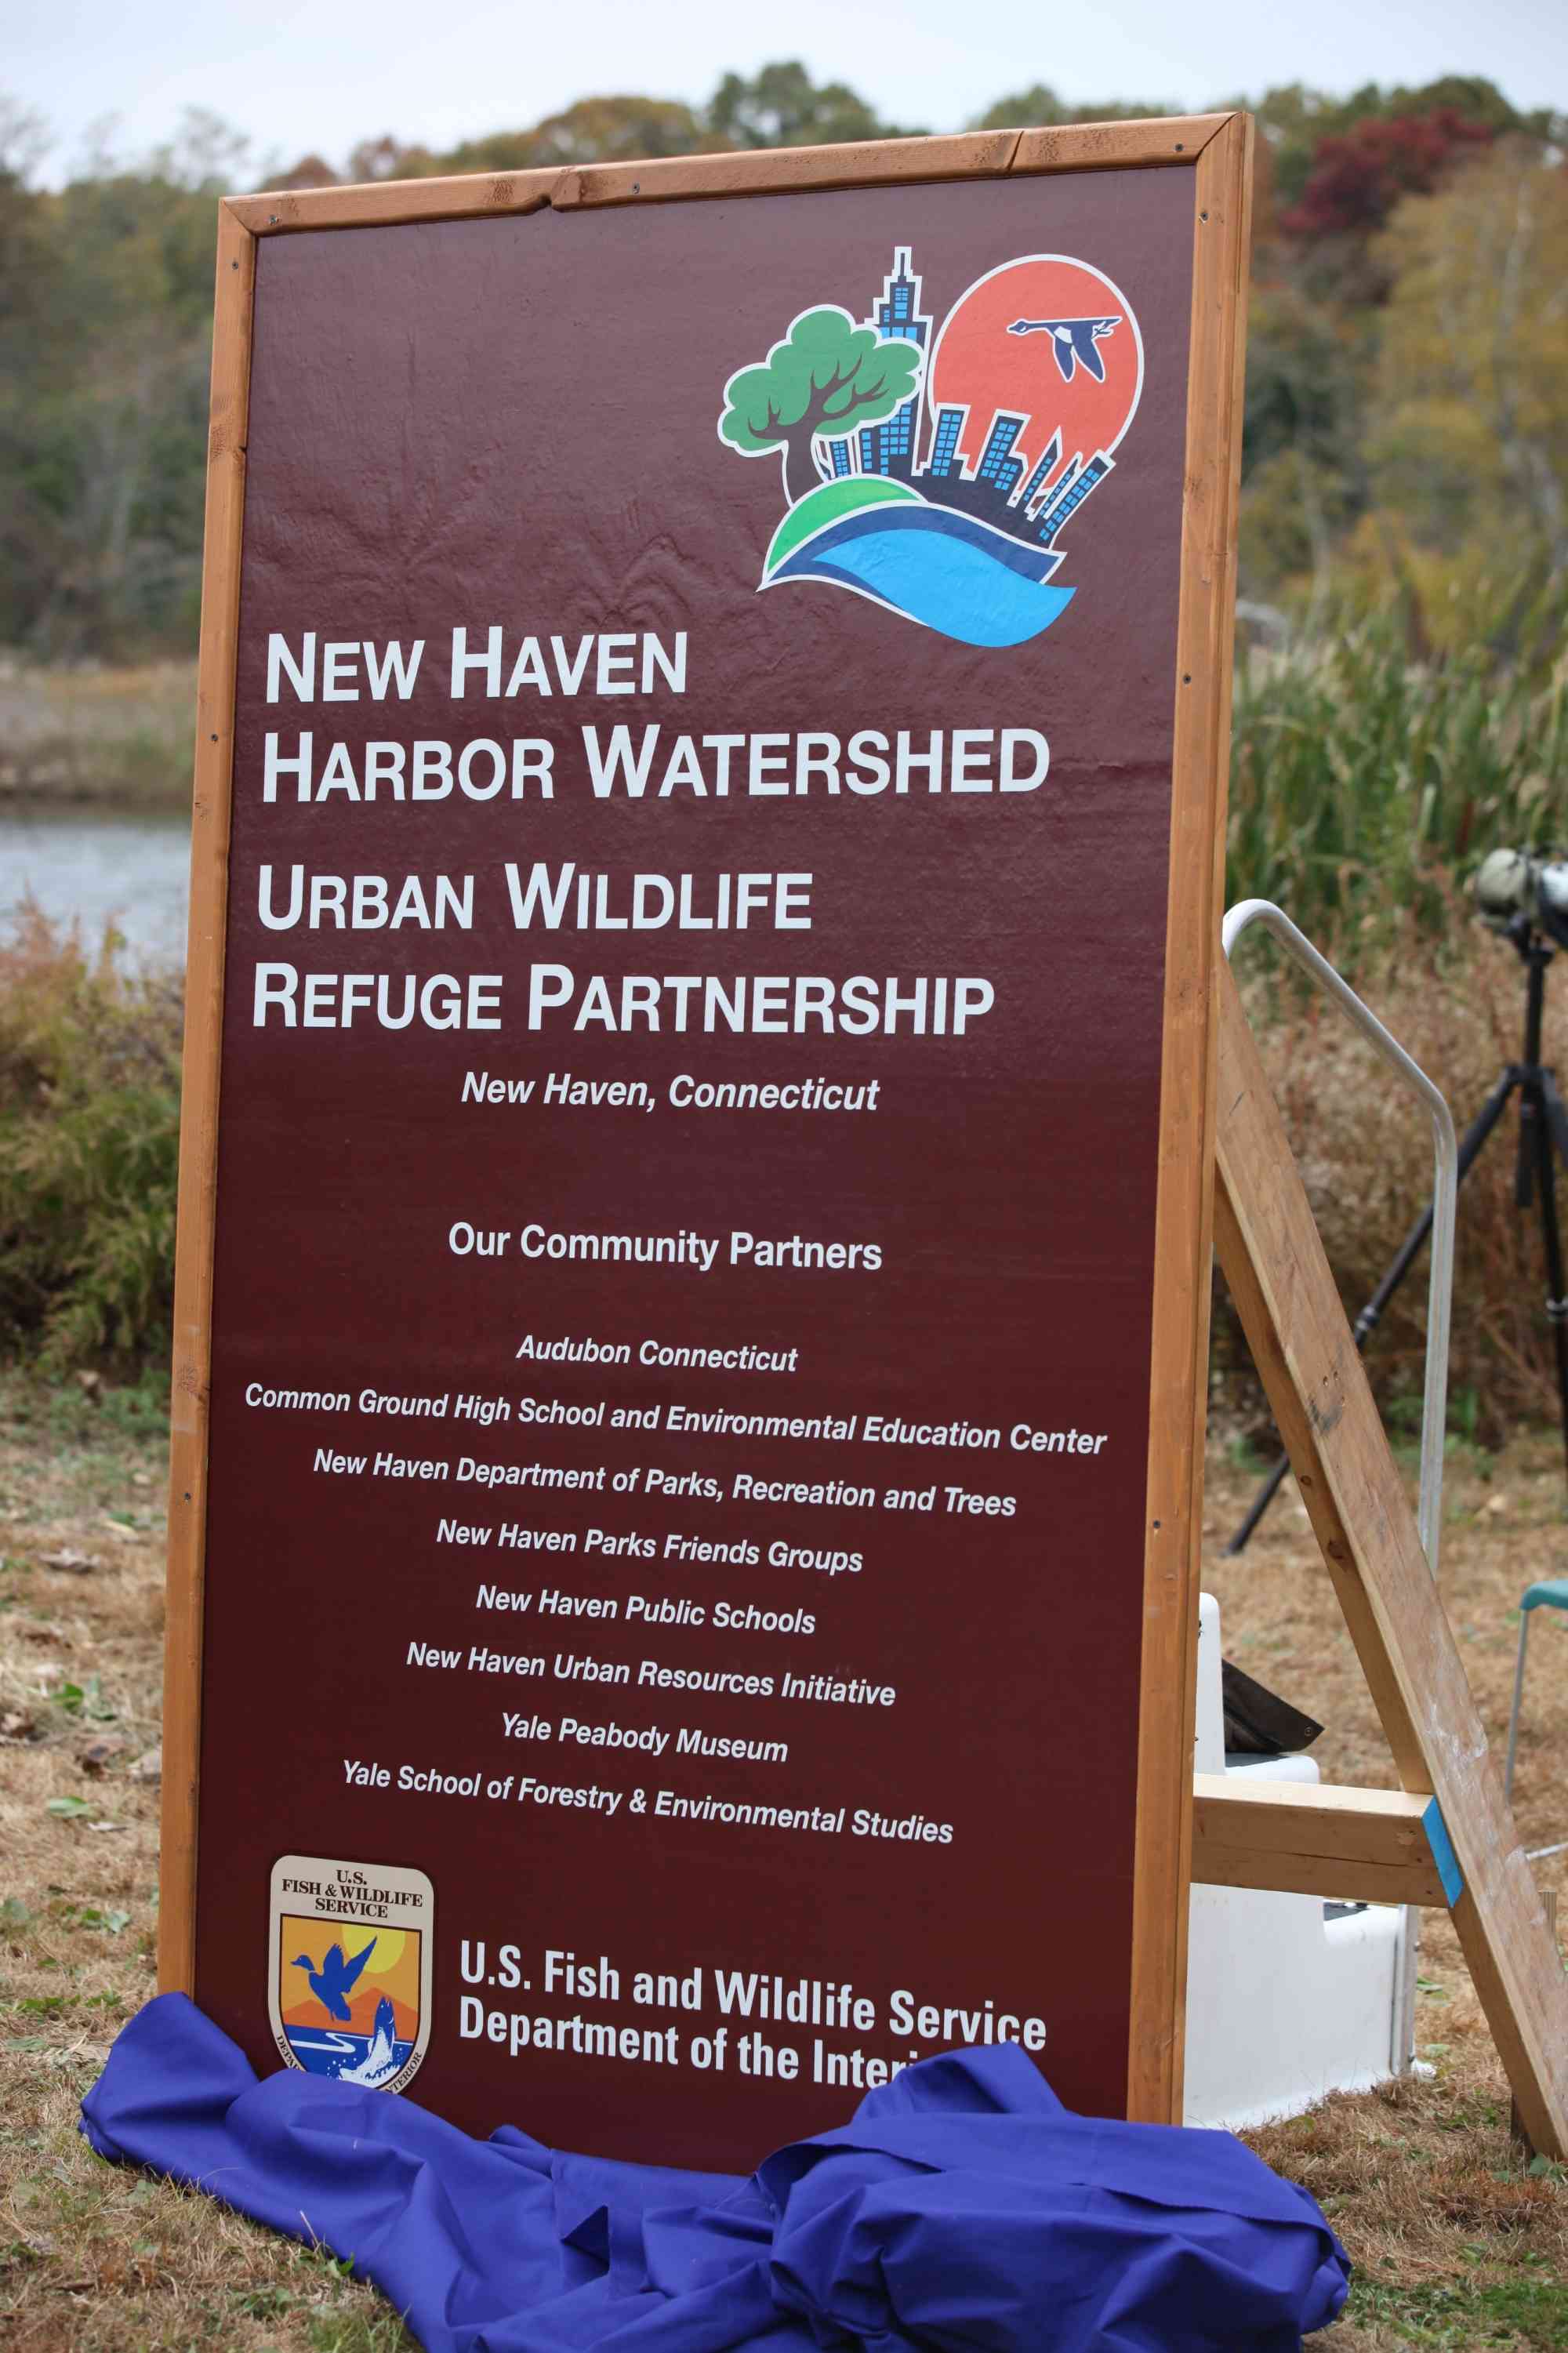 Designation of the Urban Oases project in the New Haven Harbor Watershed